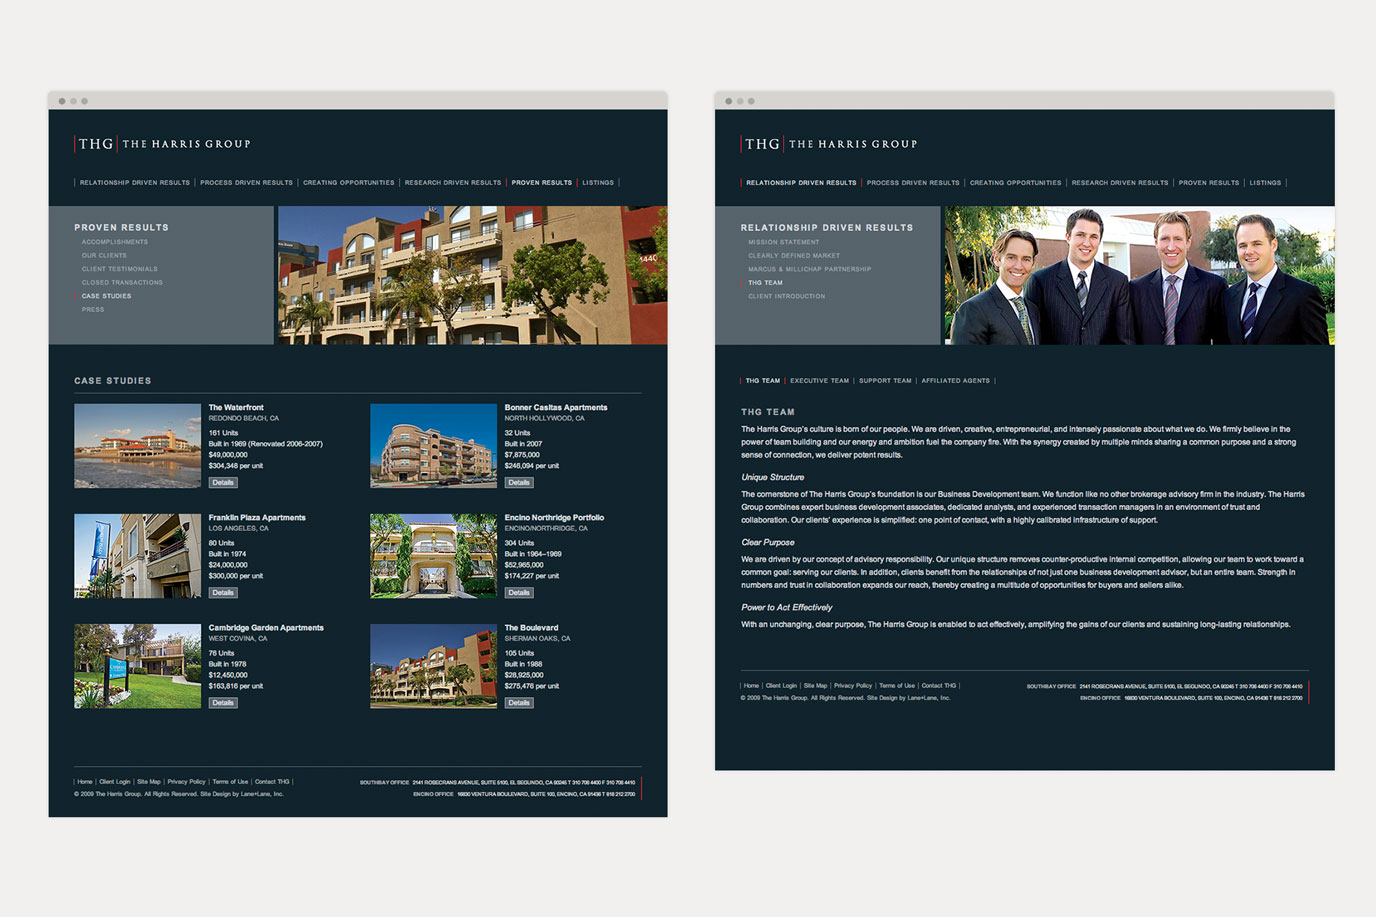 The Harris Group website Our Team and Case Studies pages